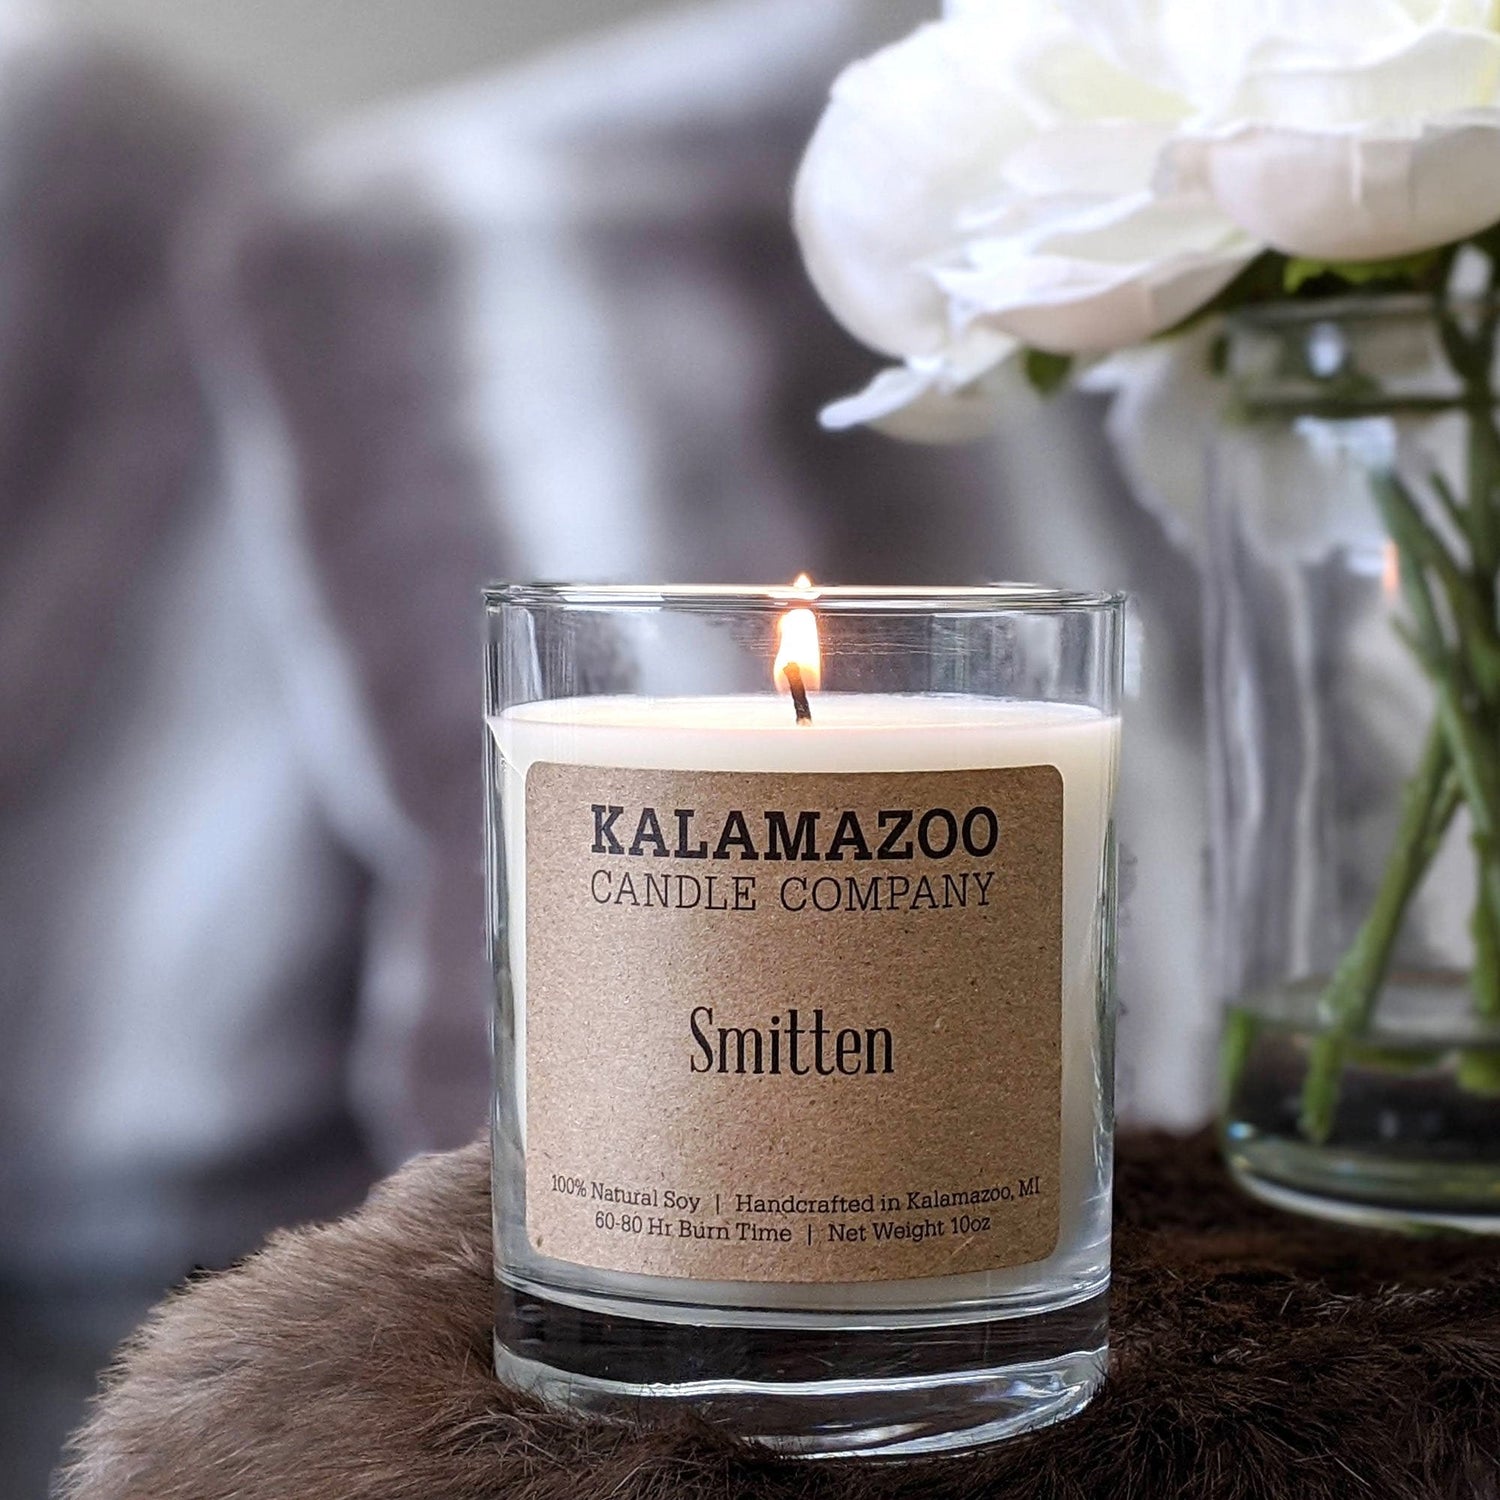 A Smitten Candle next to White Roses